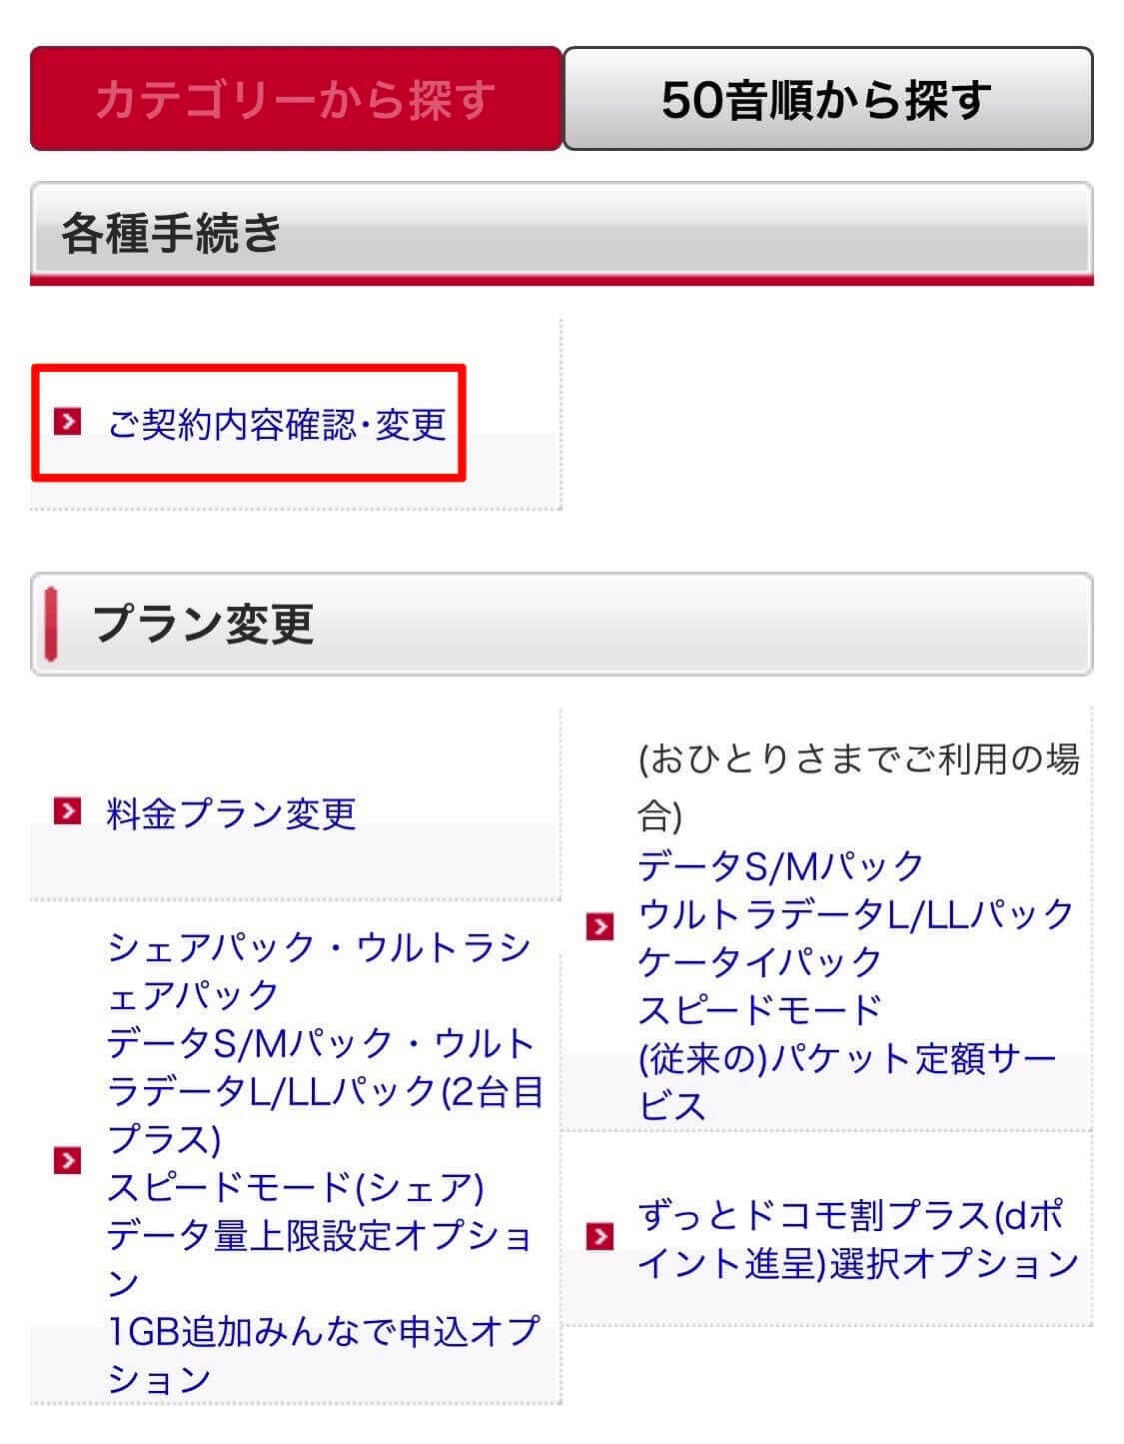 The docomo one number service cancellation of a contract 3